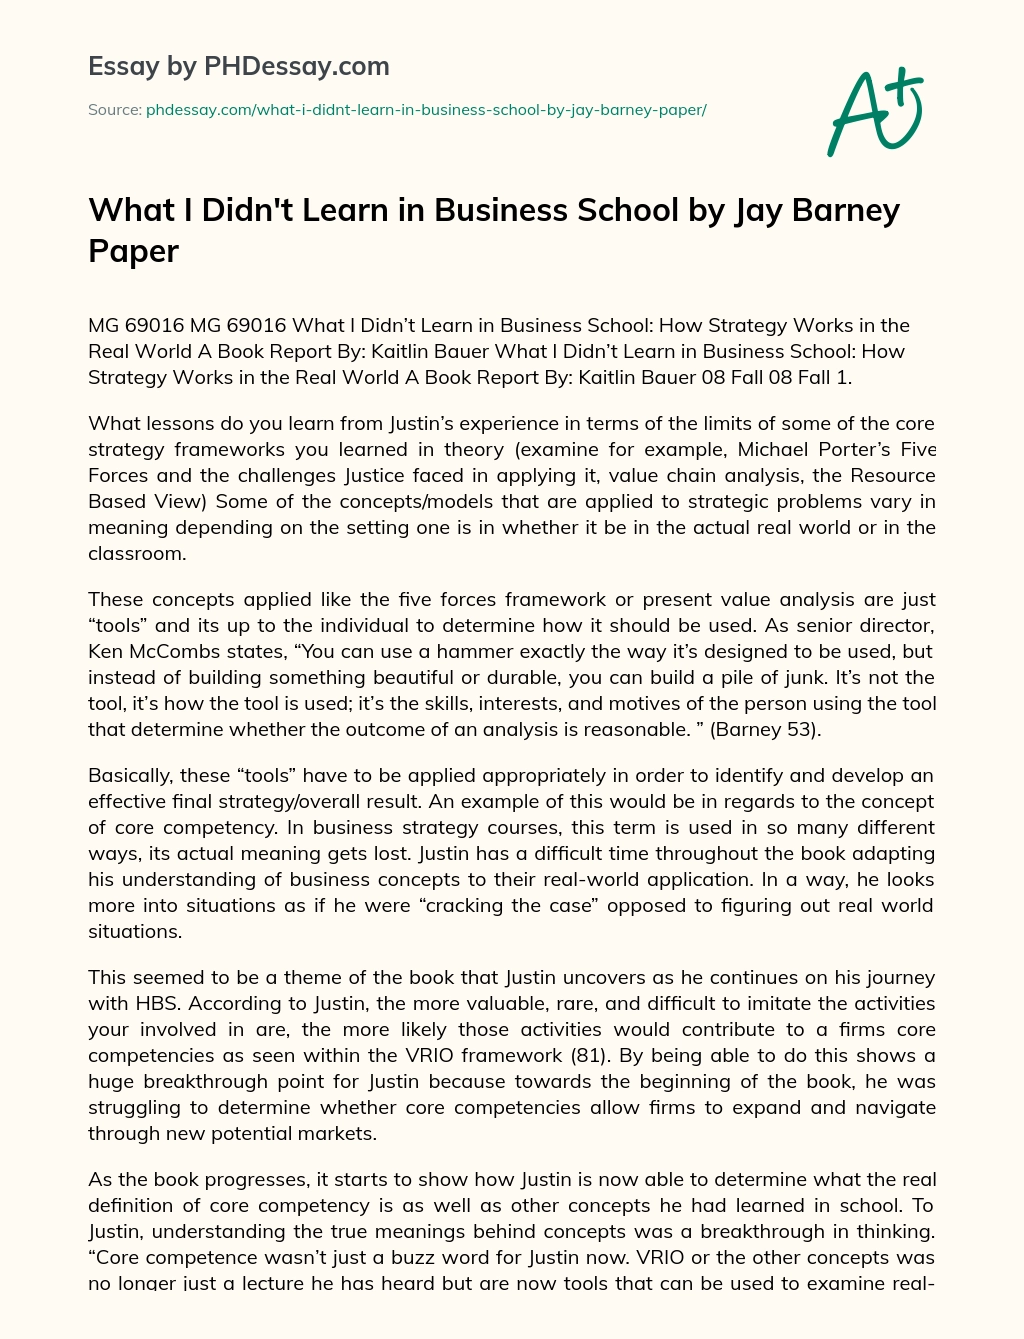 What I Didn’t Learn in Business School by Jay Barney Paper essay